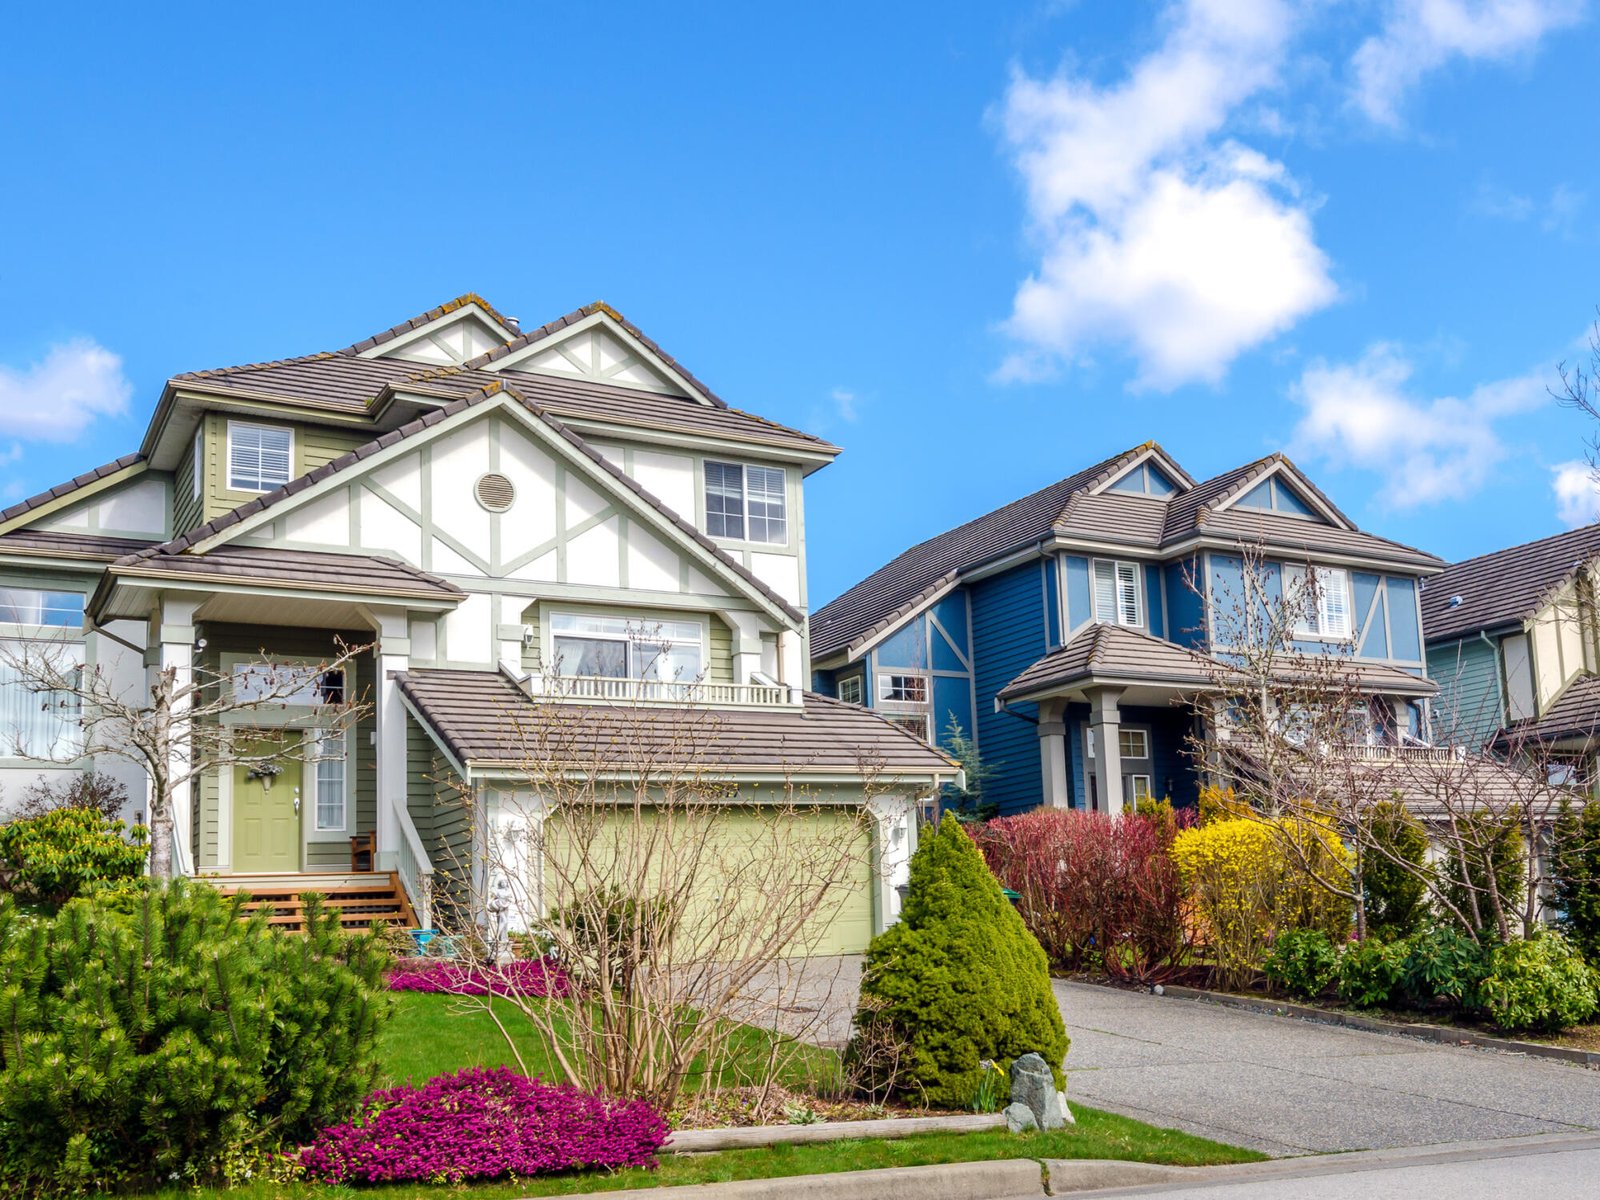 HOA Property Management Best Practices for Keeping Residents Happy